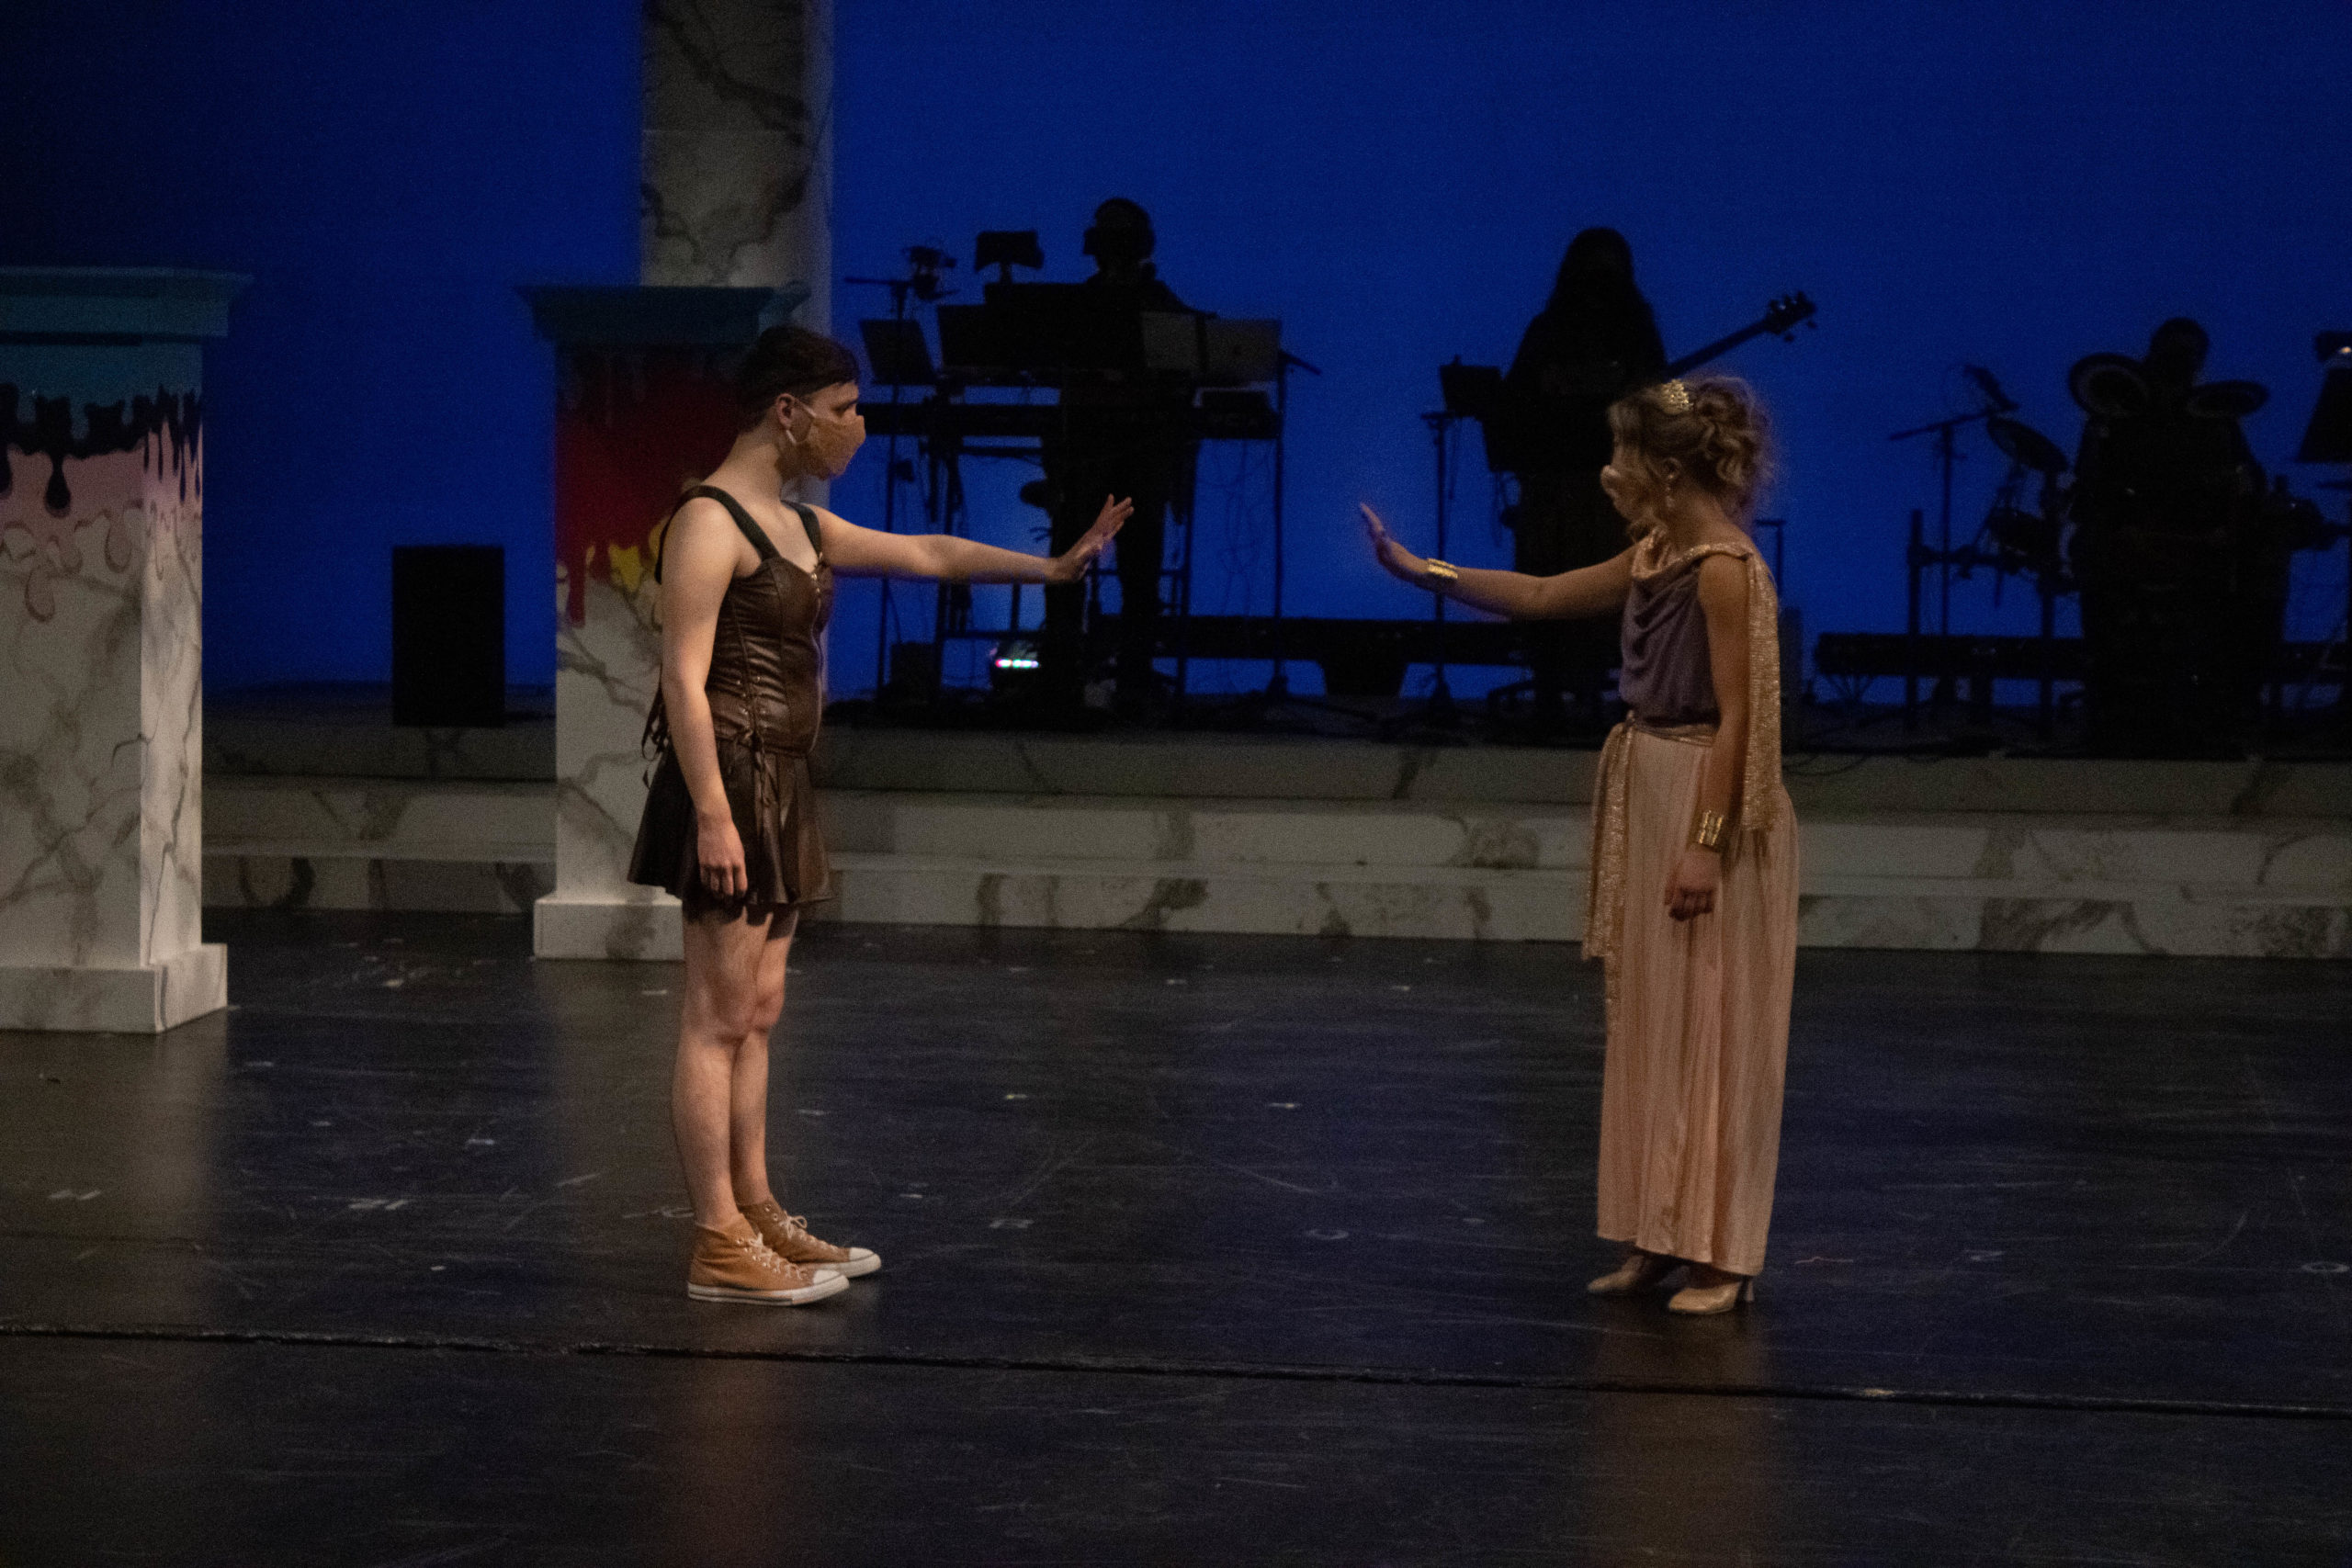 Two masked performers, a young man and a young woman, stand six feet apart onstage, reaching towards one another.